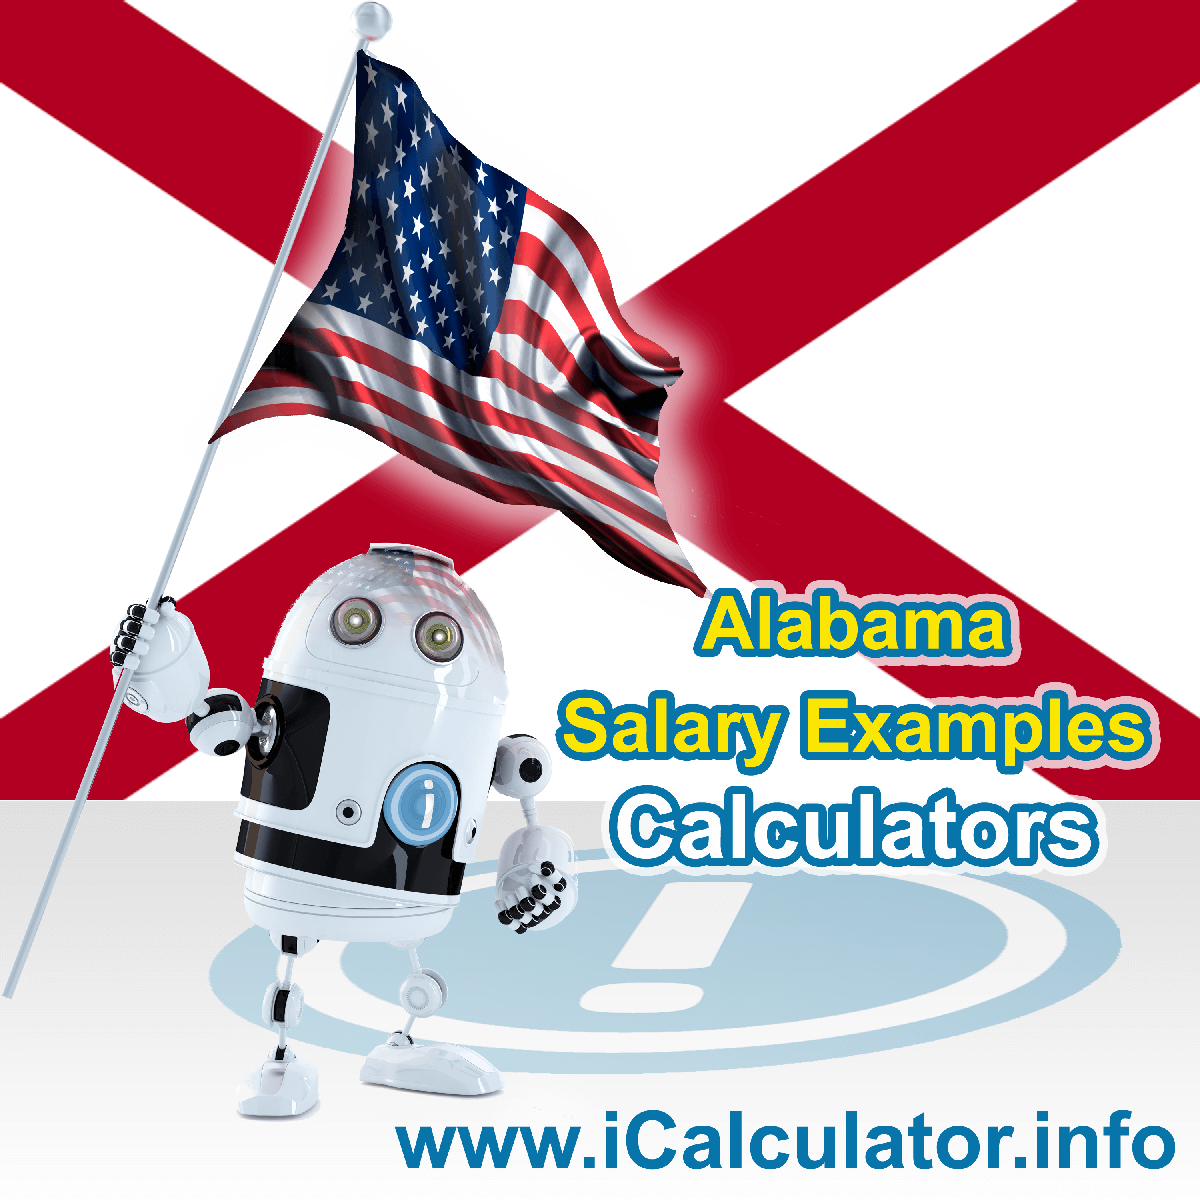 Alabama Salary Example for $ 270,000.00 in 2023 | iCalculator™ | $ 270,000.00 salary example for employee and employer paying Alabama State tincome taxes. Detailed salary after tax calculation including Alabama State Tax, Federal State Tax, Medicare Deductions, Social Security, Capital Gains and other income tax and salary deductions complete with supporting Alabama state tax tables 